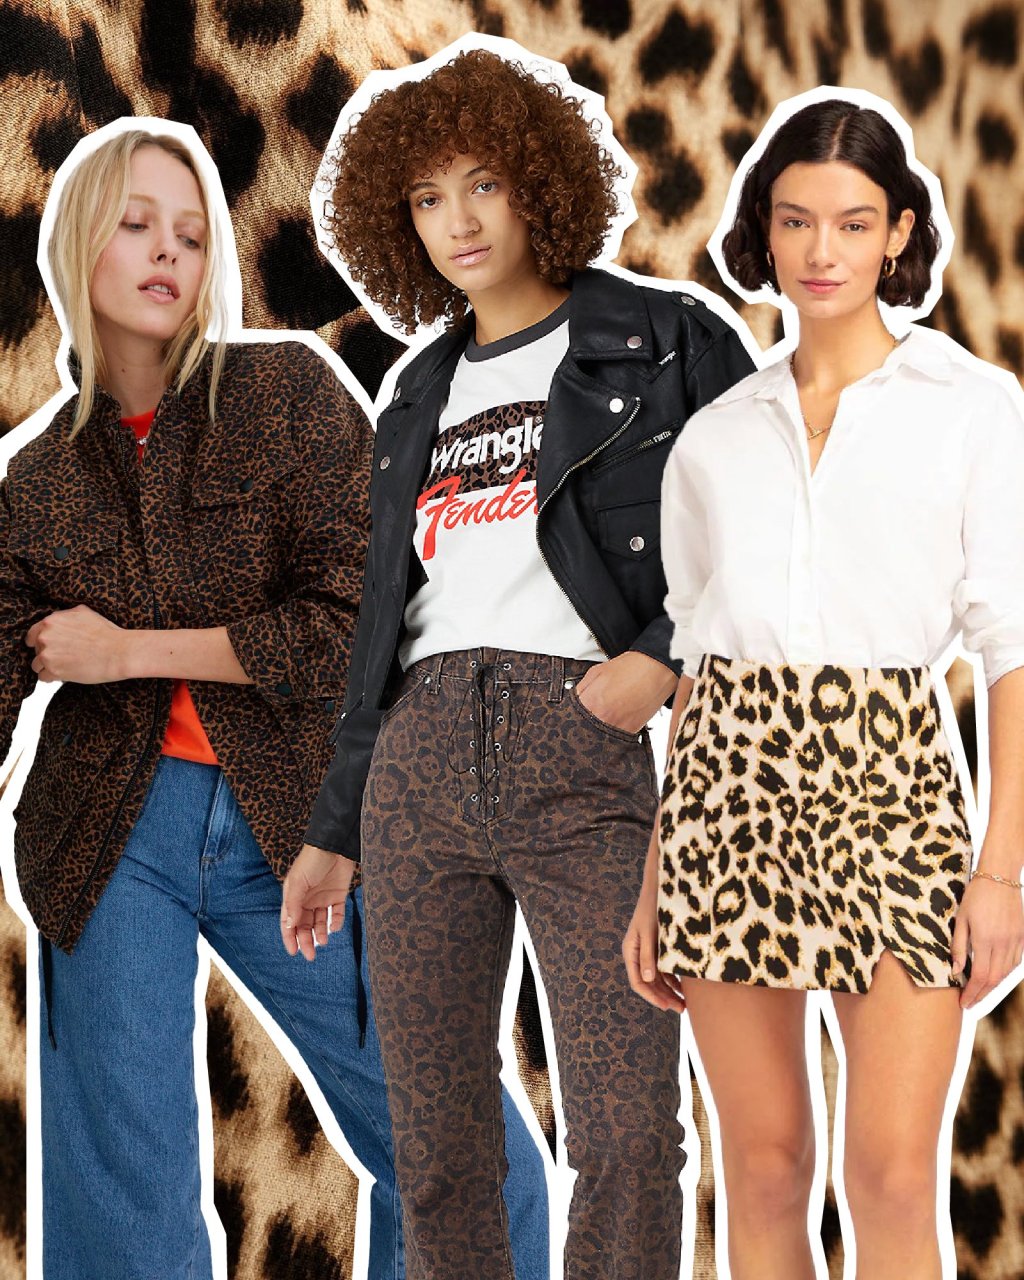 Leopard skirts are fall's biggest trend: Shop 12 versions now